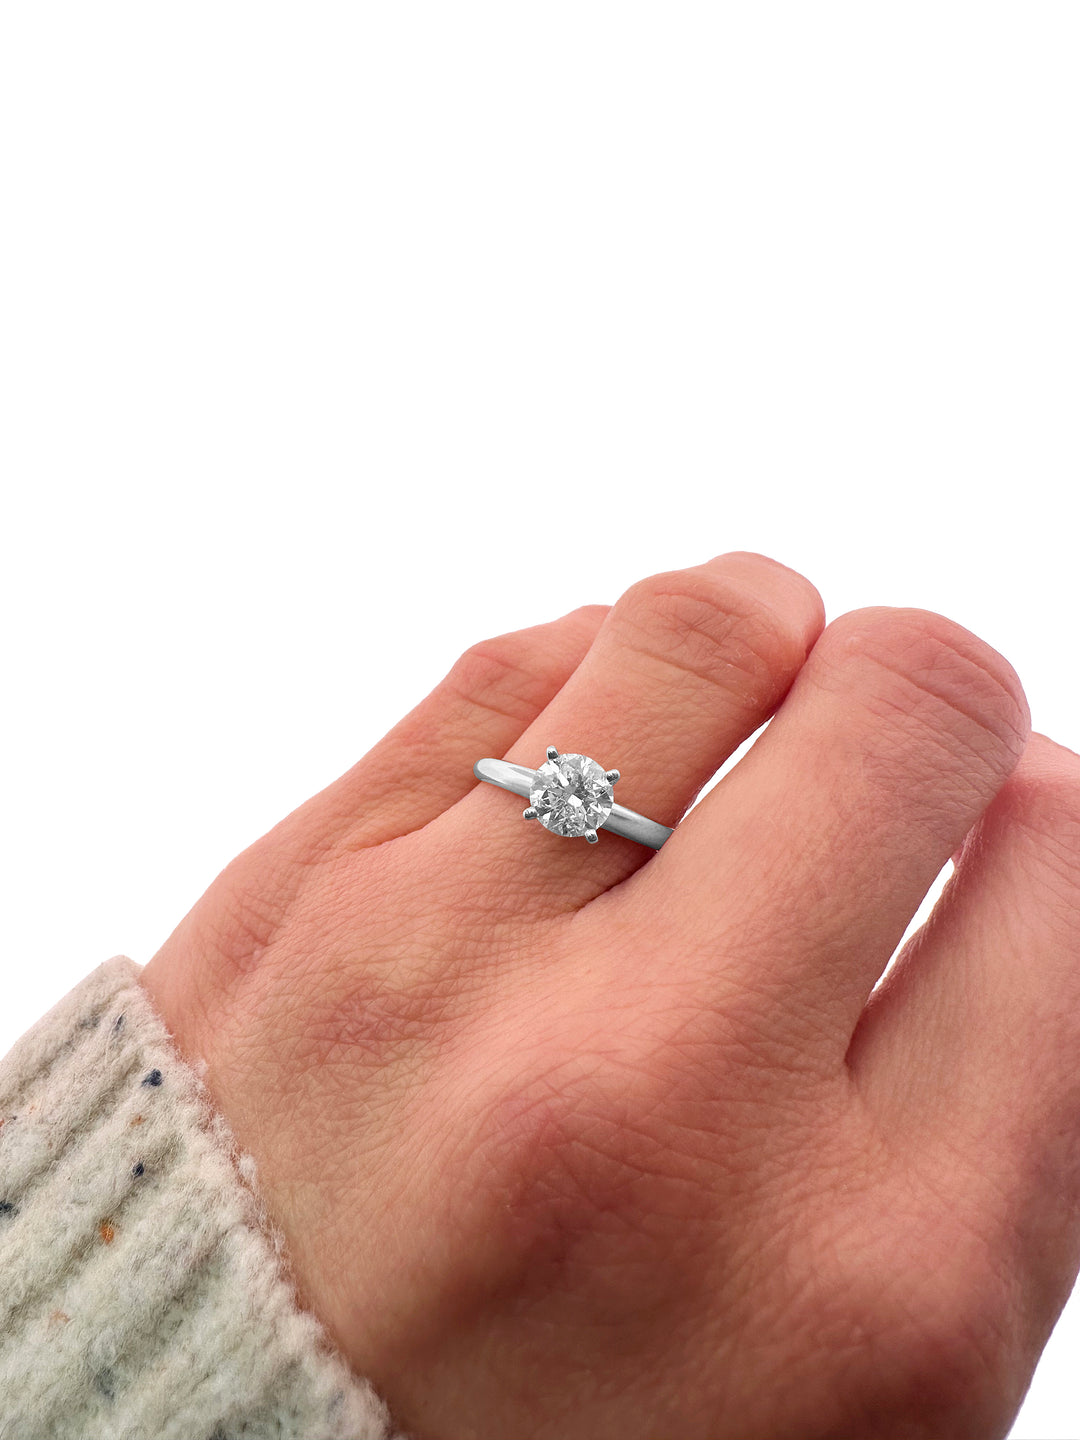 Classic 1.01cts round brilliant solitaire in 14k white gold, on hand